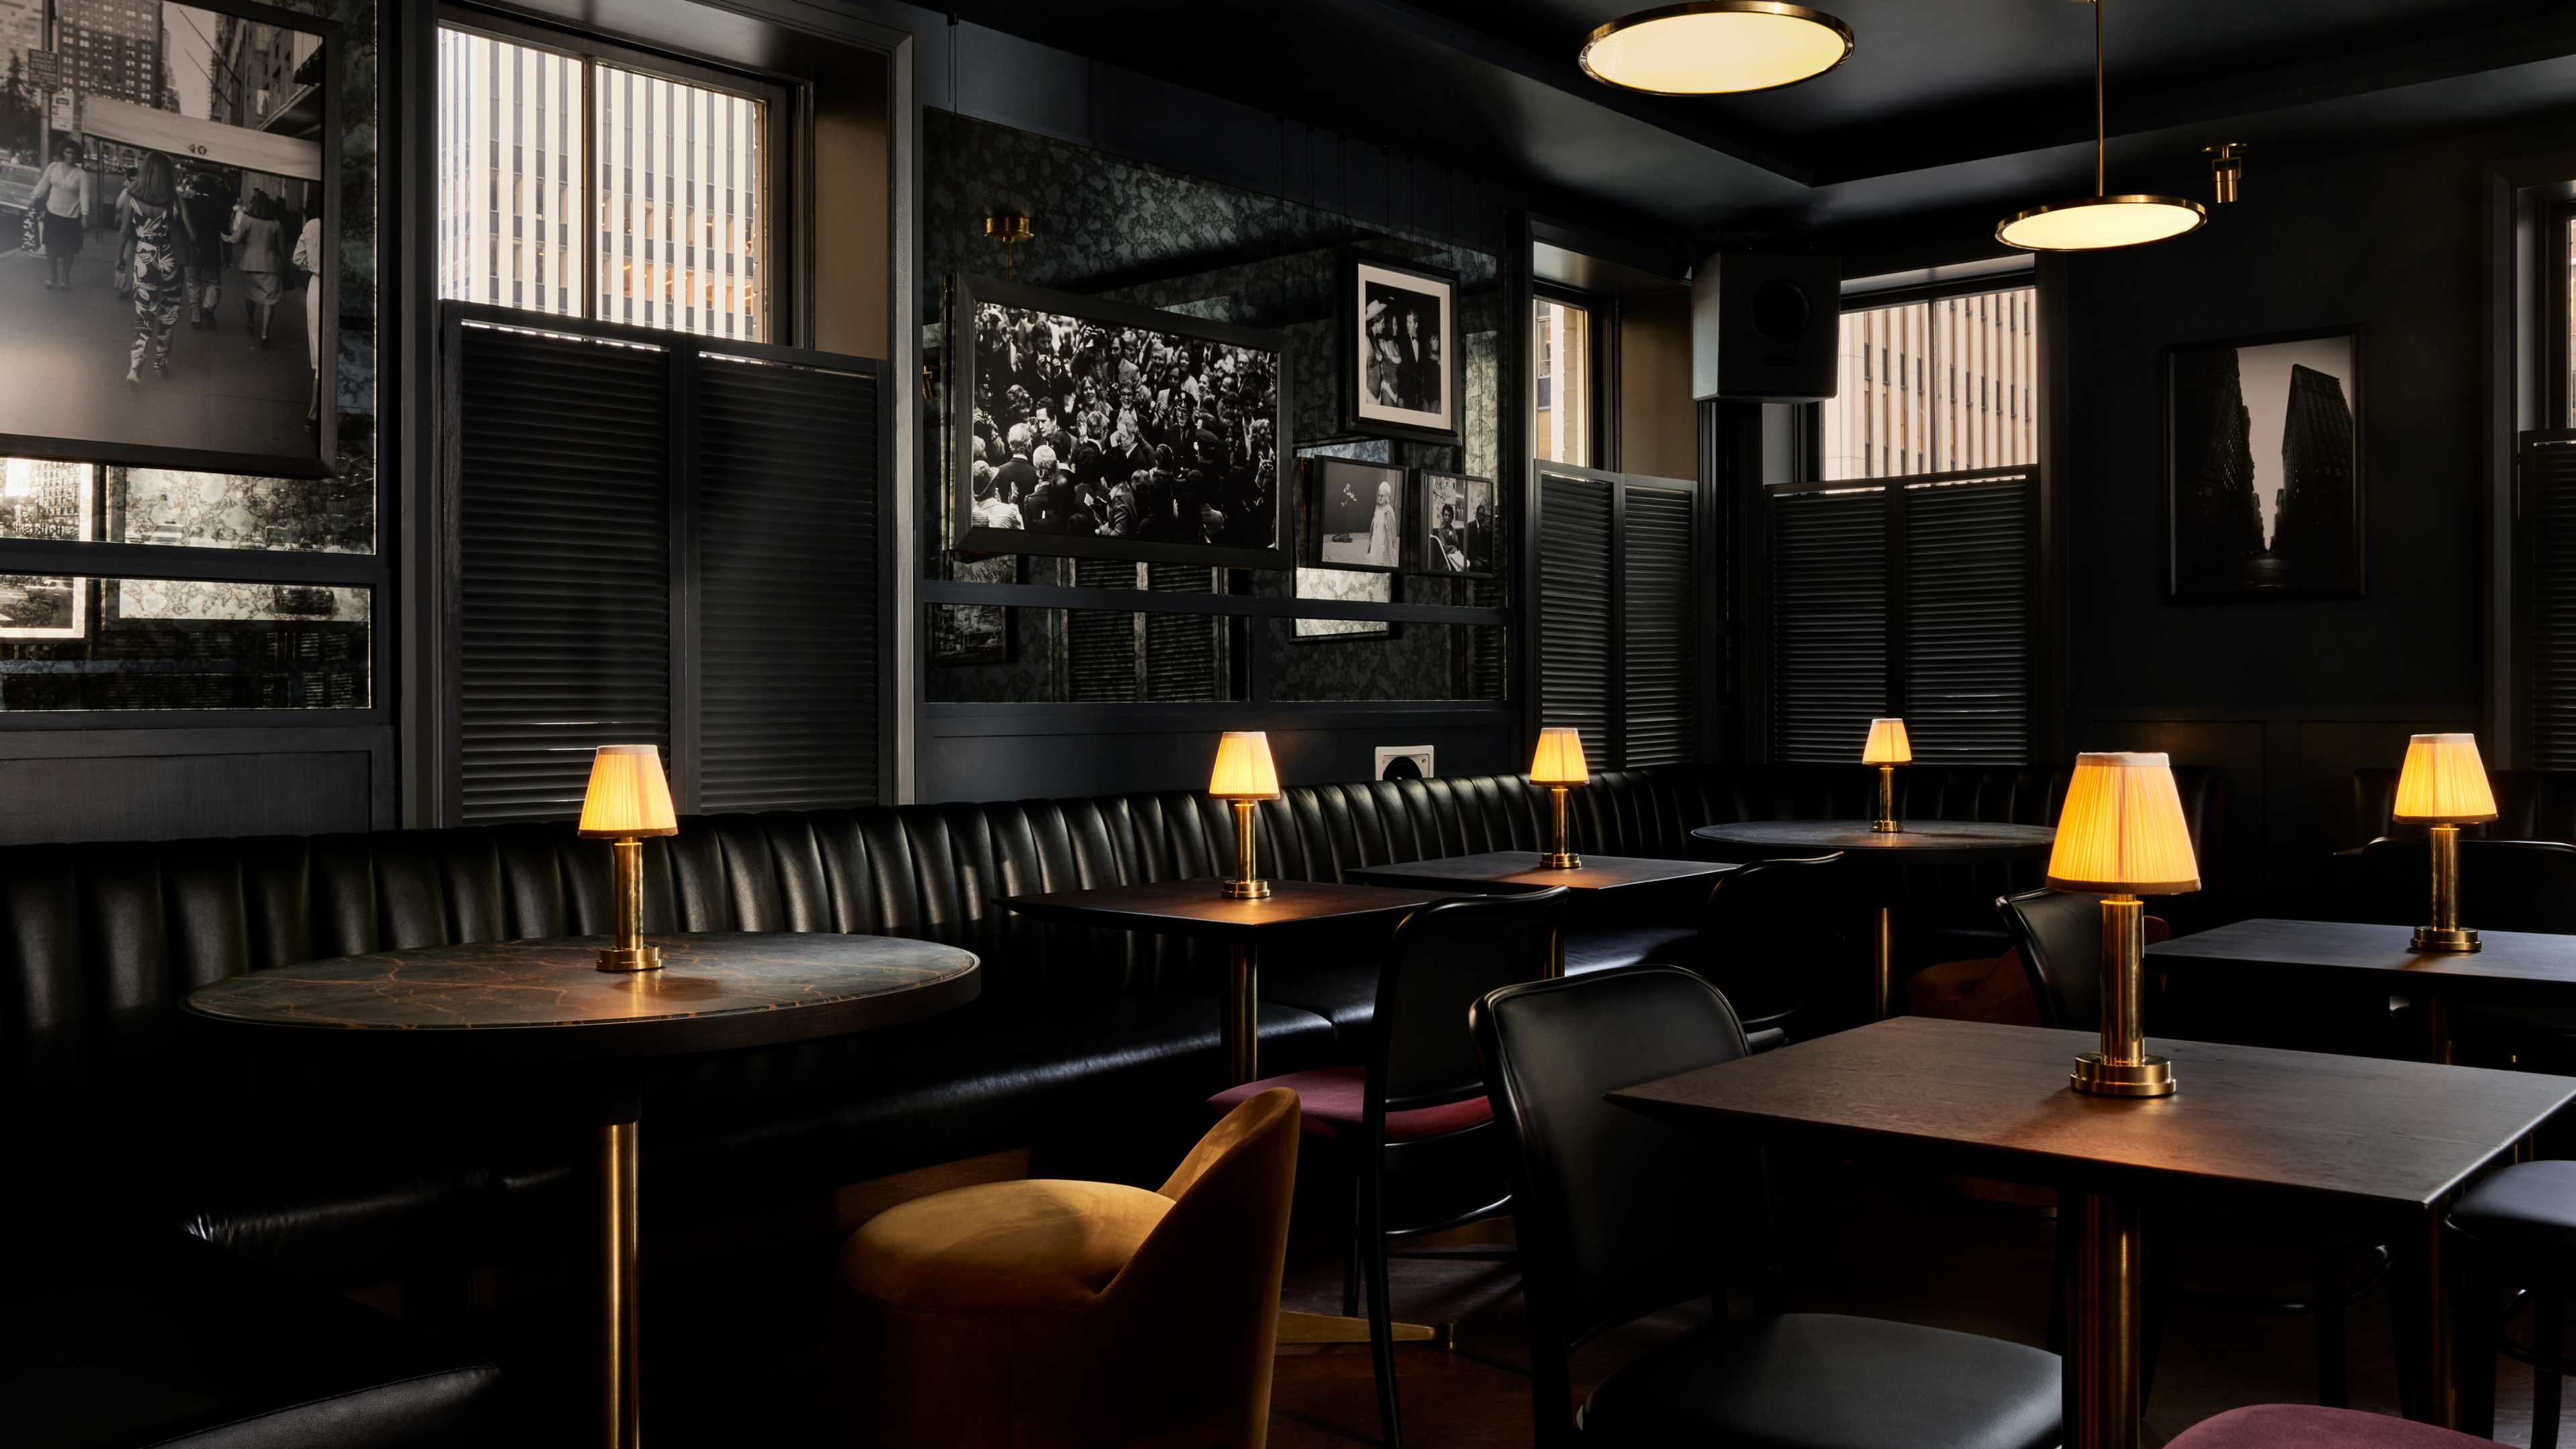 The dining area on the third floor at Pebble Bar lit by small lamps on each table. There are black leather booths and framed art on the walls.